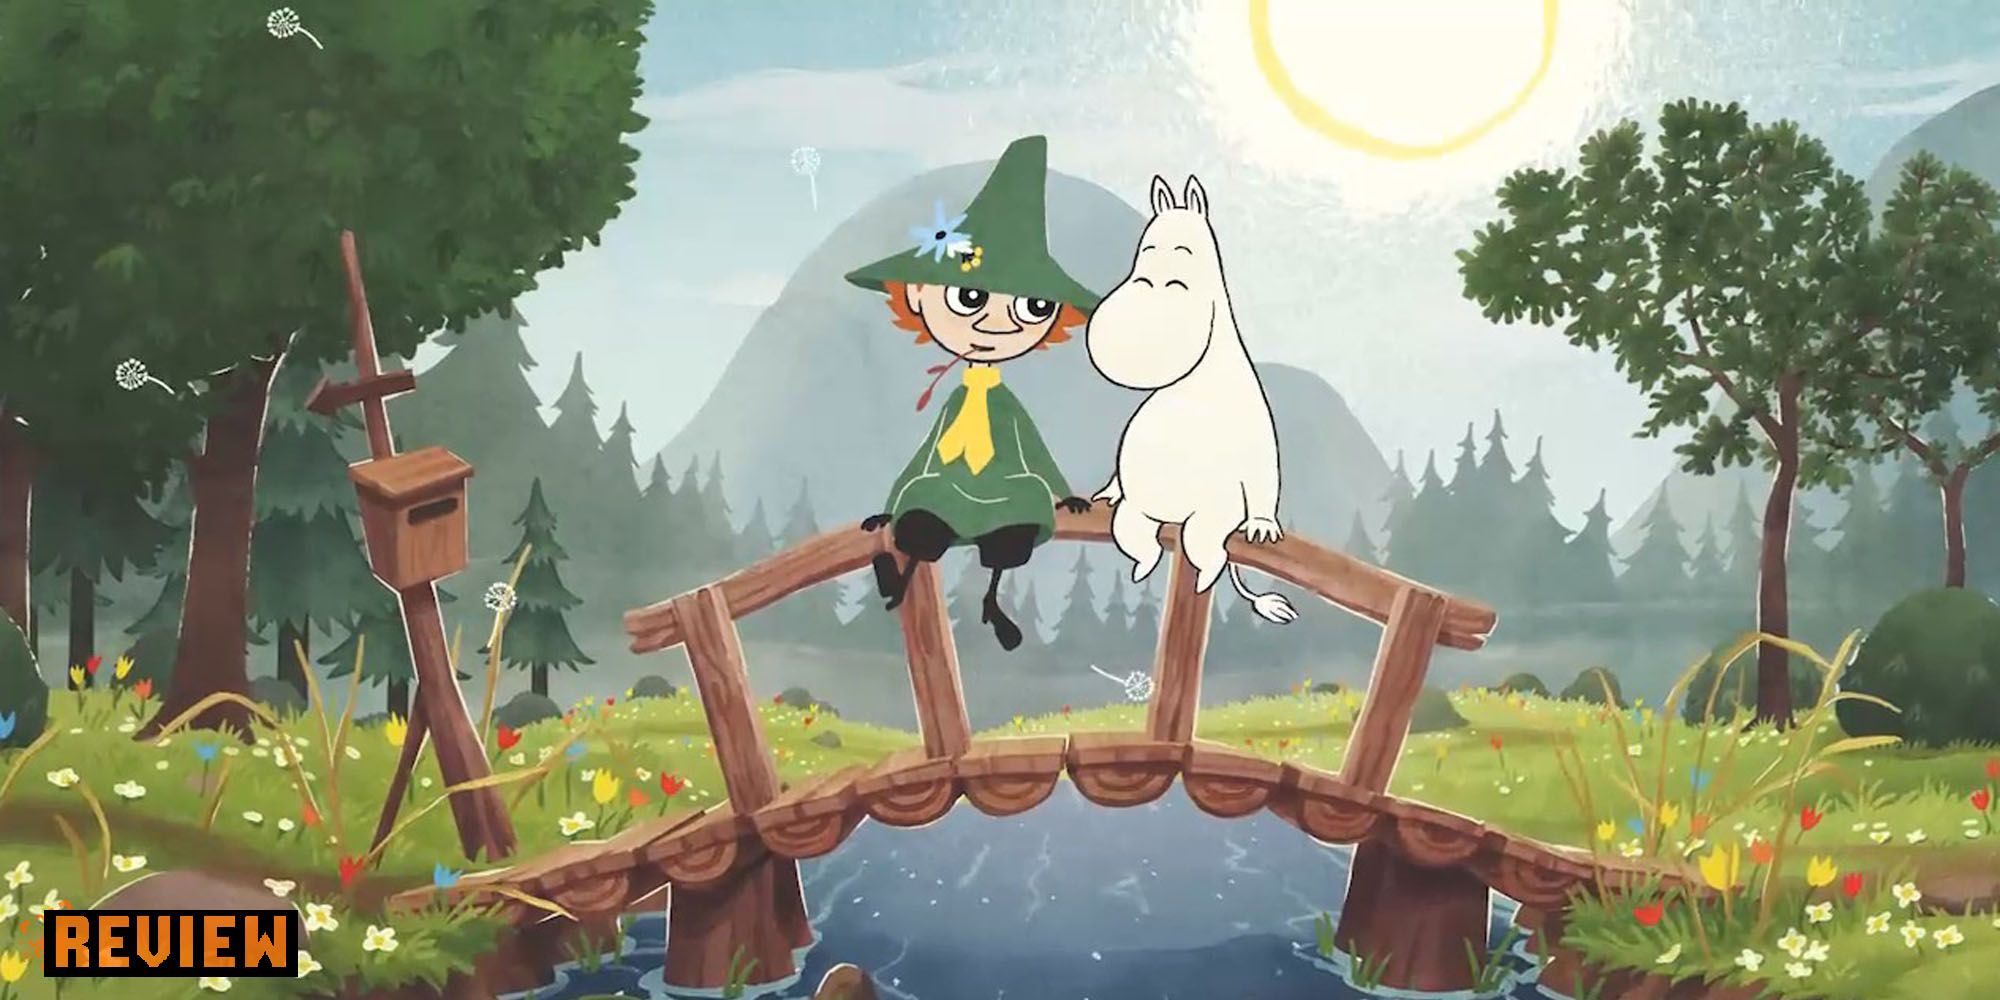 Snufkin and Moomintroll sitting on a bride in Snufkin Melody of Moominvalley